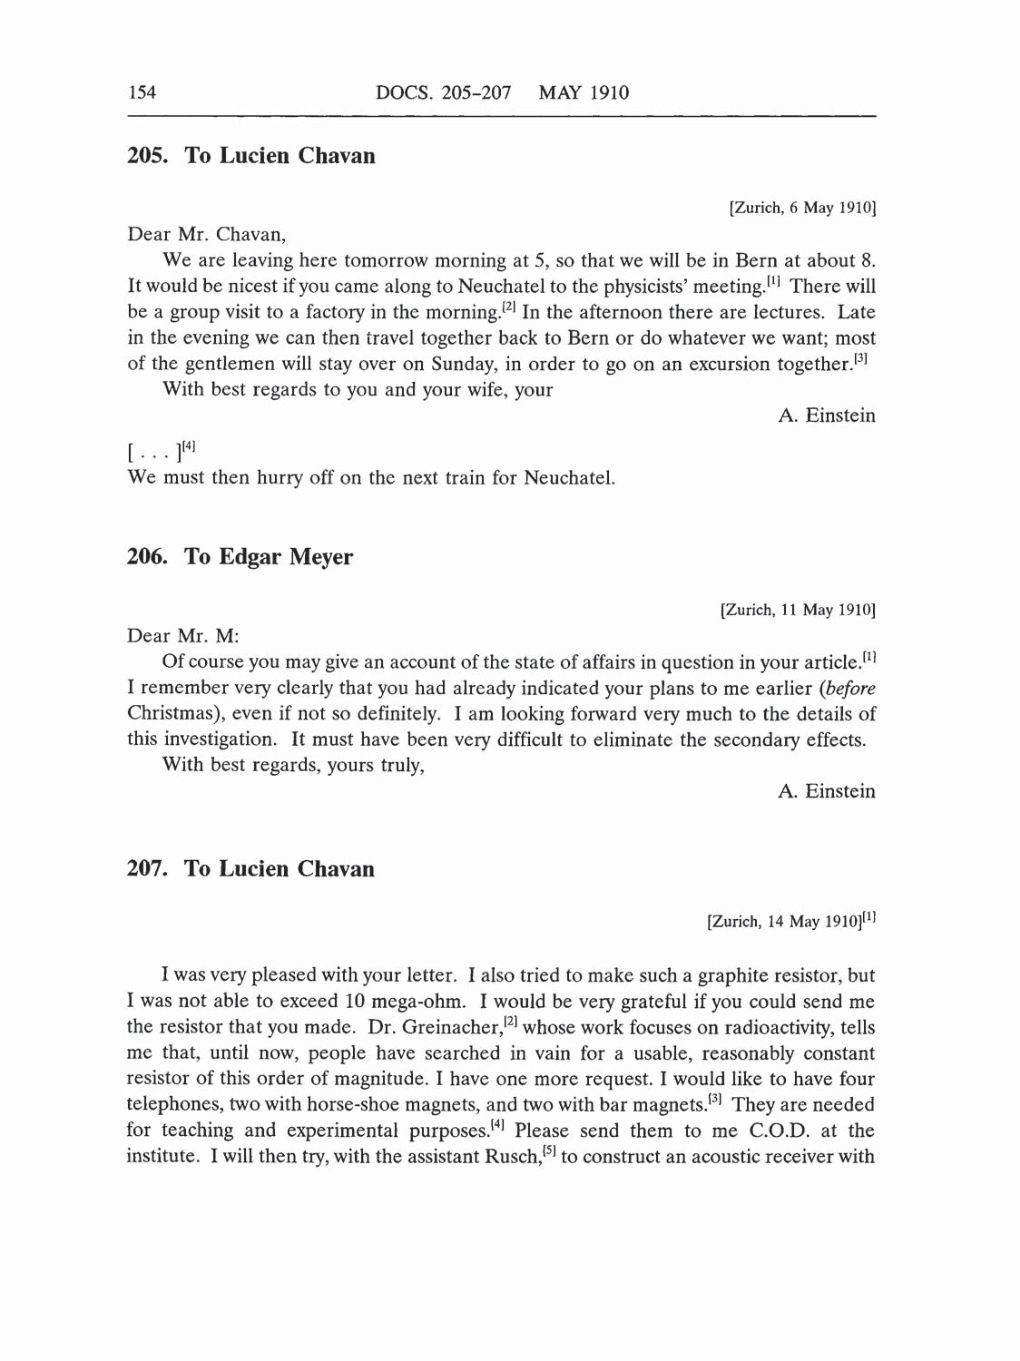 Volume 5: The Swiss Years: Correspondence, 1902-1914 (English translation supplement) page 154